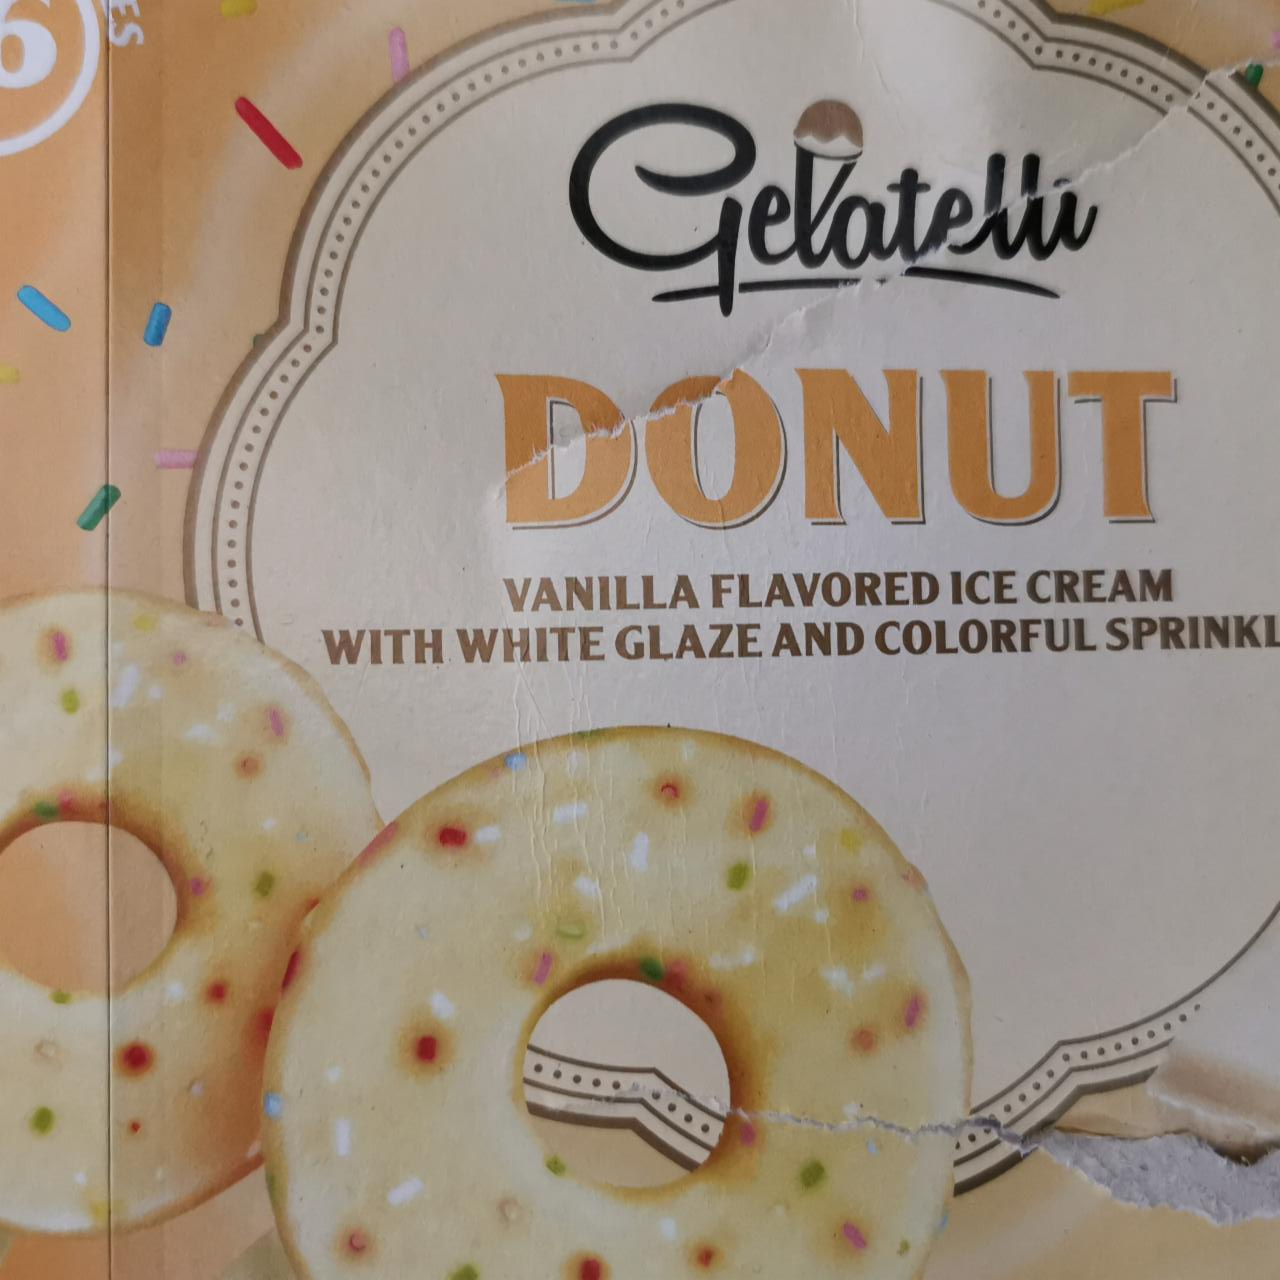 Fotografie - Donut Vanilla flavored ice cream with white glaze and colorful sprinkles Gelatelli